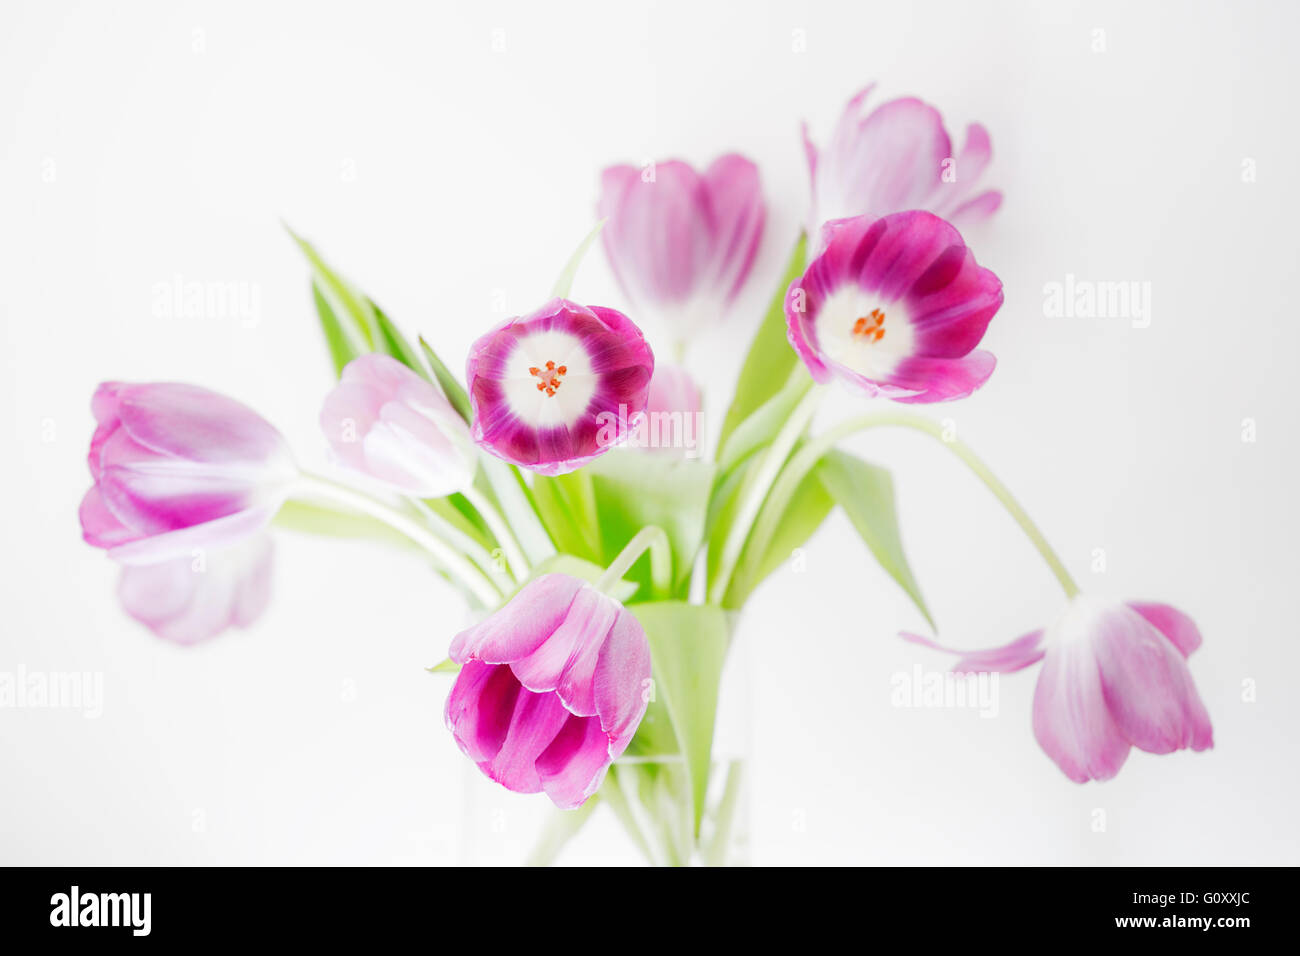 Tulip Extravaganza - An informal, modern arrangement of pink tulips in a glass vase set against a bright white background. Stock Photo